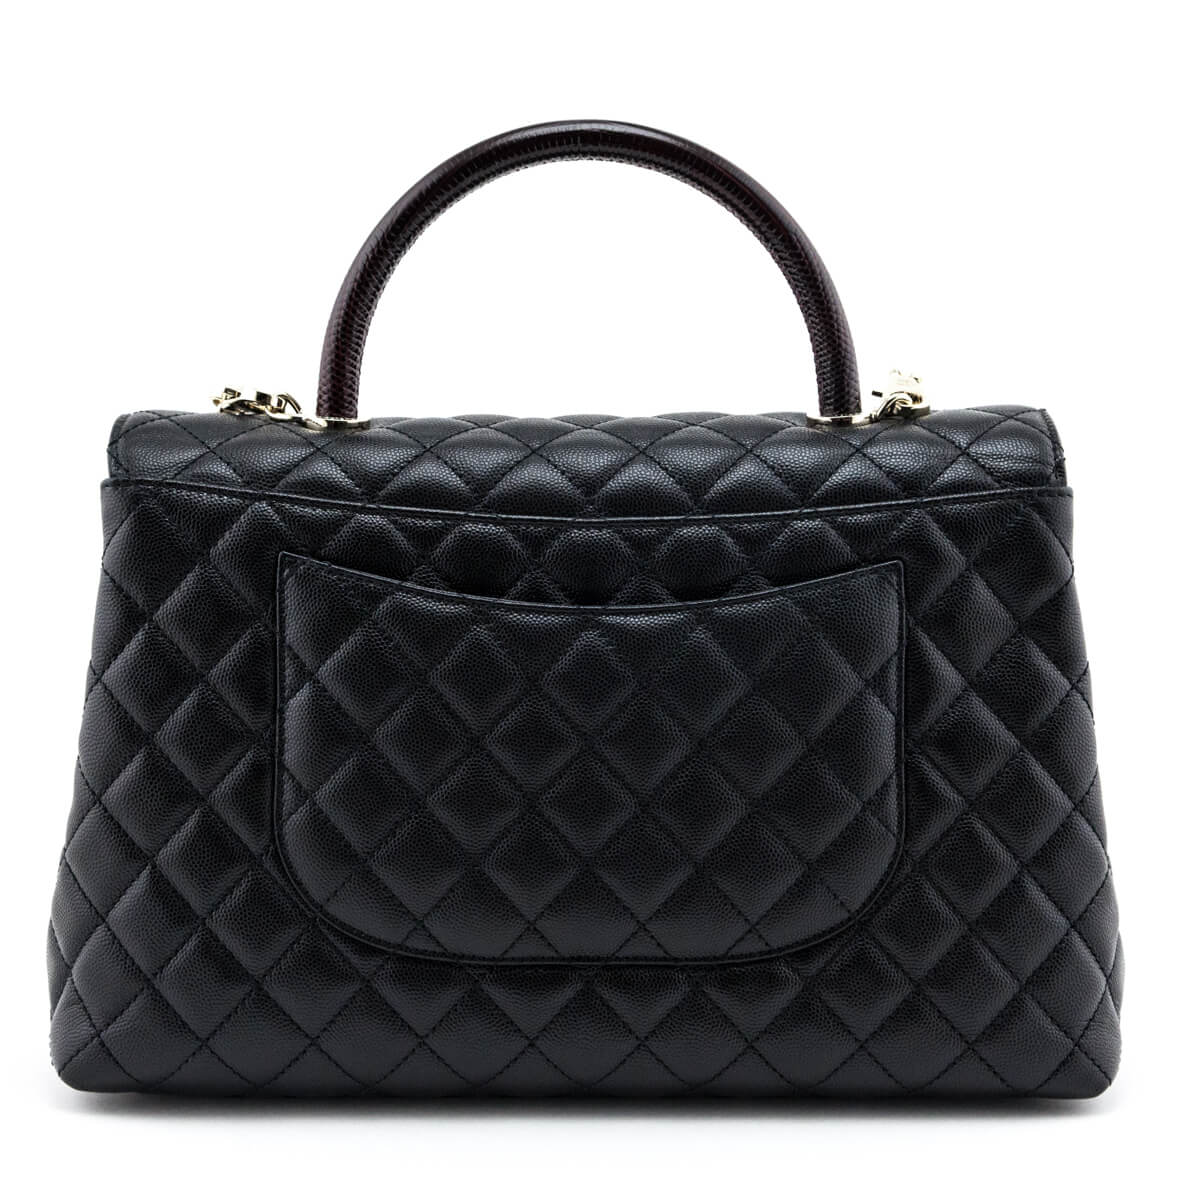 Chanel Black Quilted Caviar & Lizard Medium Coco Handle Flap Bag - Love that Bag etc - Preowned Authentic Designer Handbags & Preloved Fashions